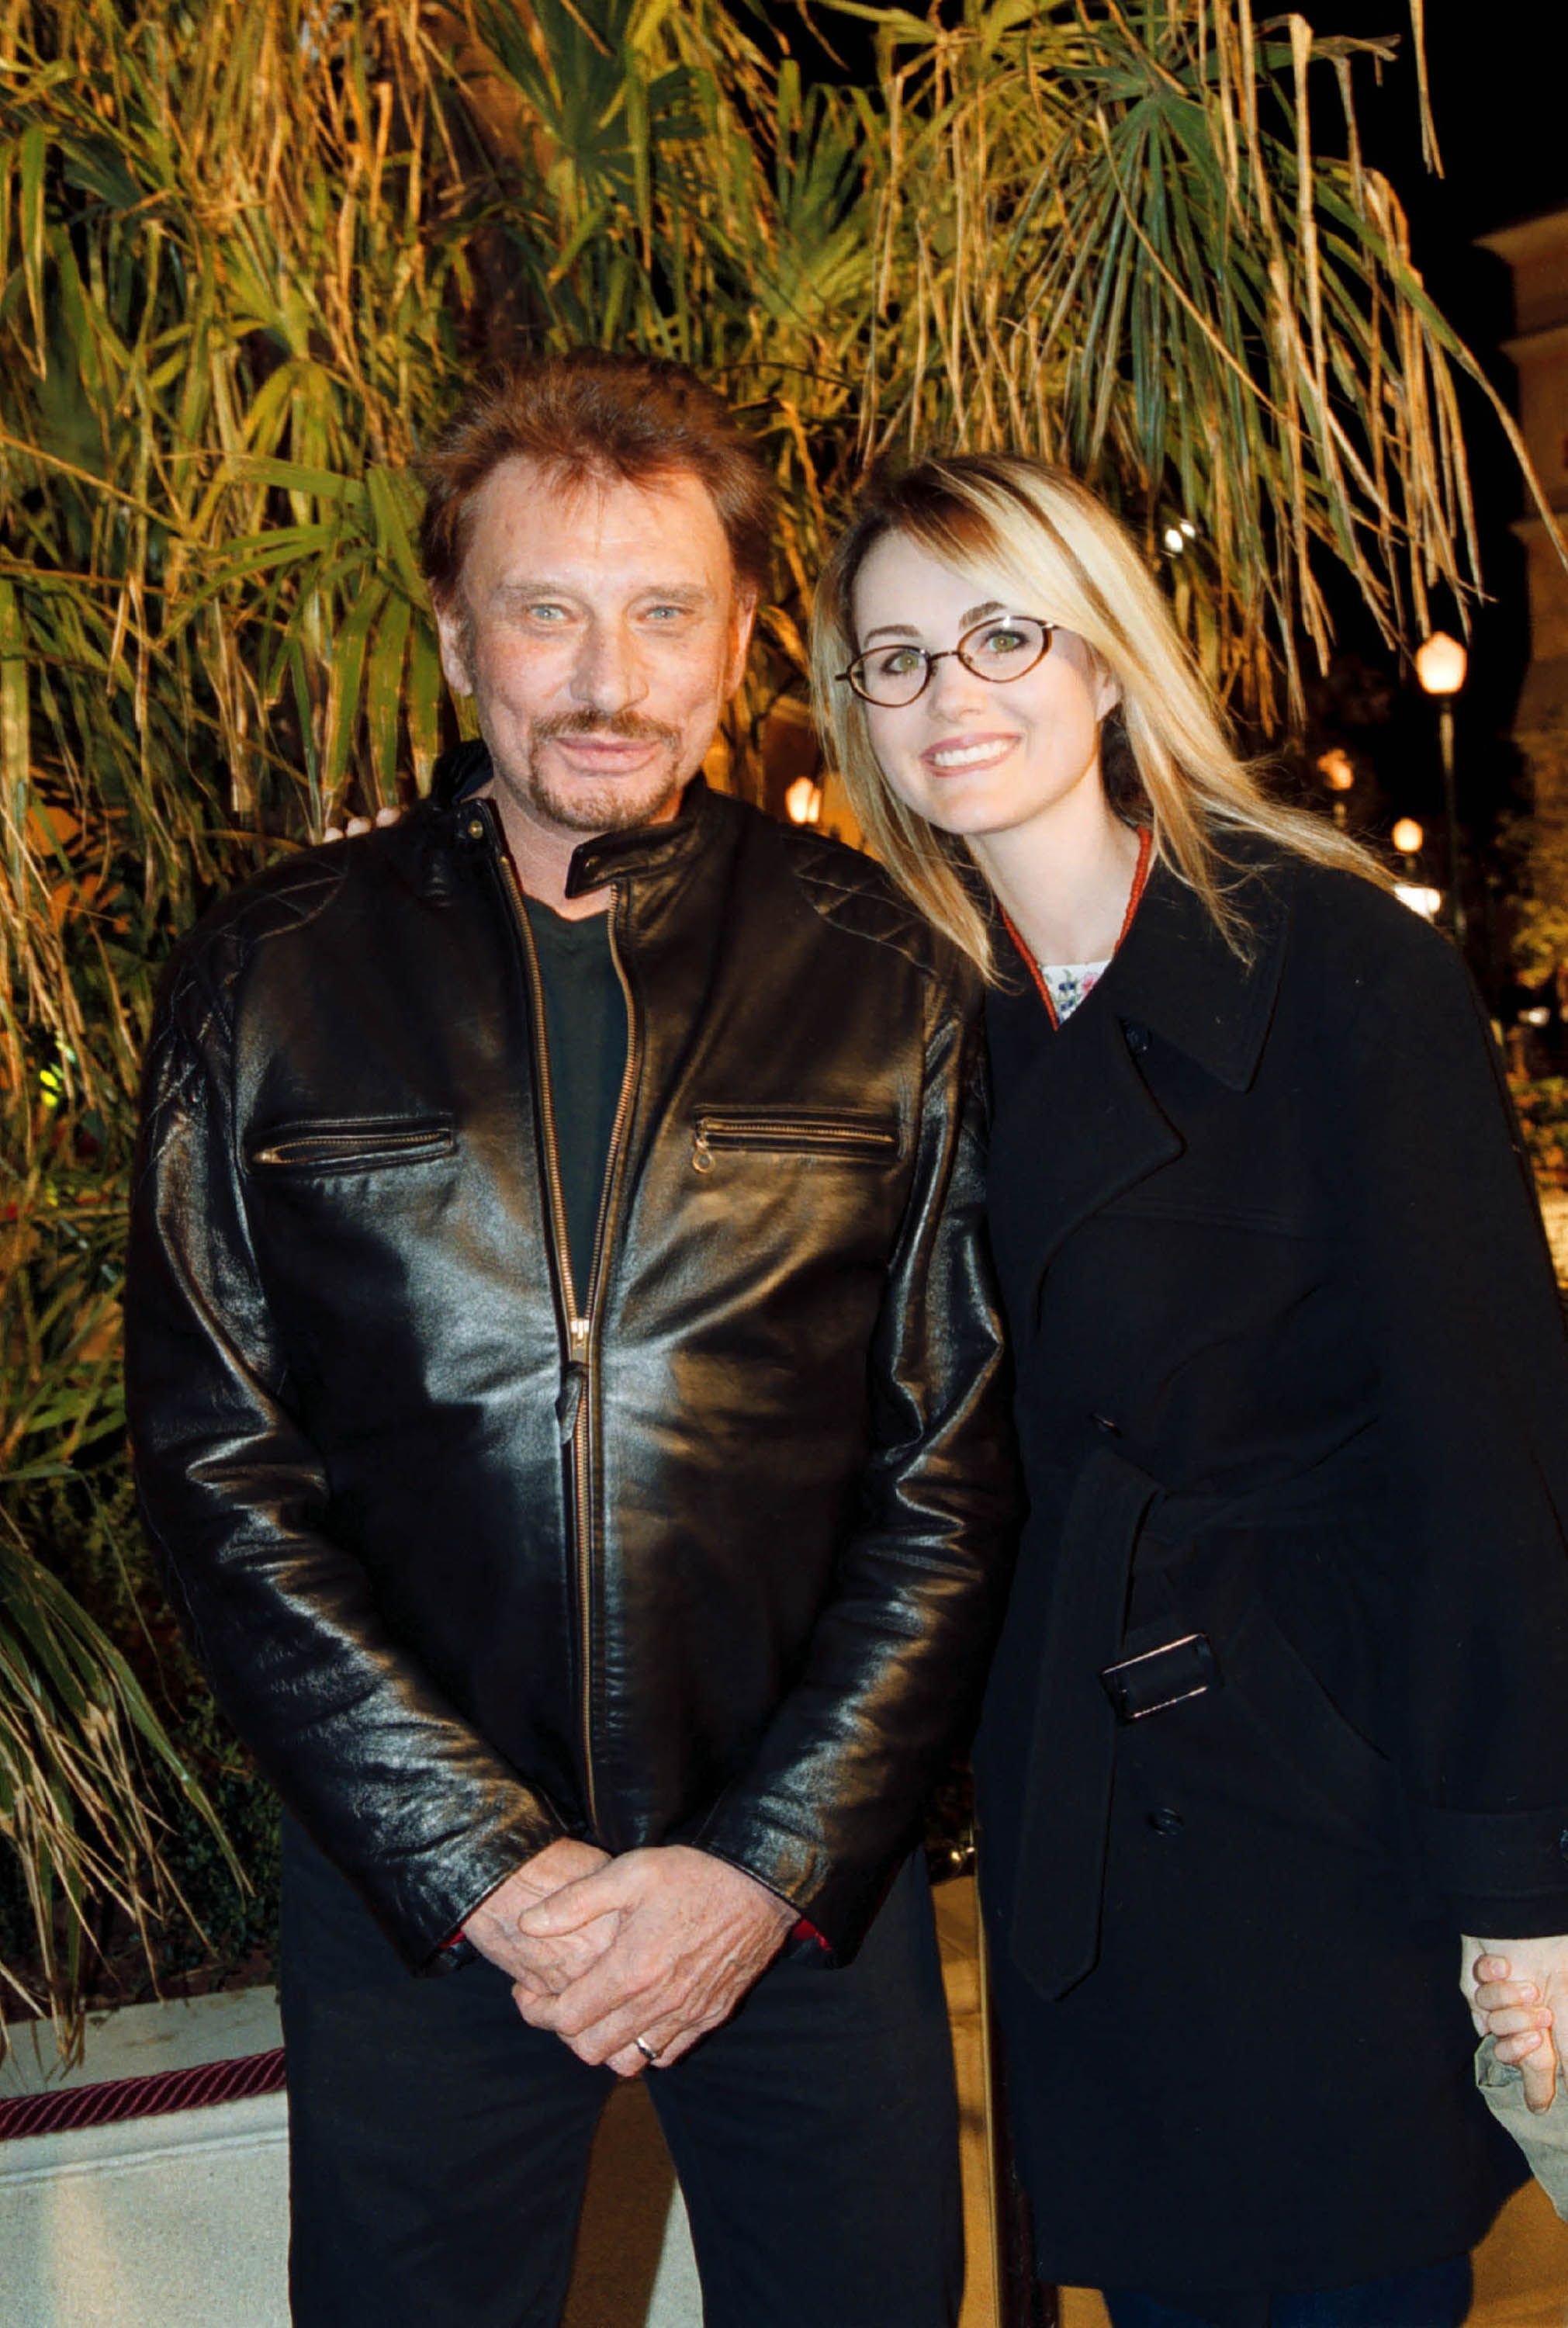 Johnny Hallyday et sa compagne Laeticia Hallyday | Photo : Getty Images